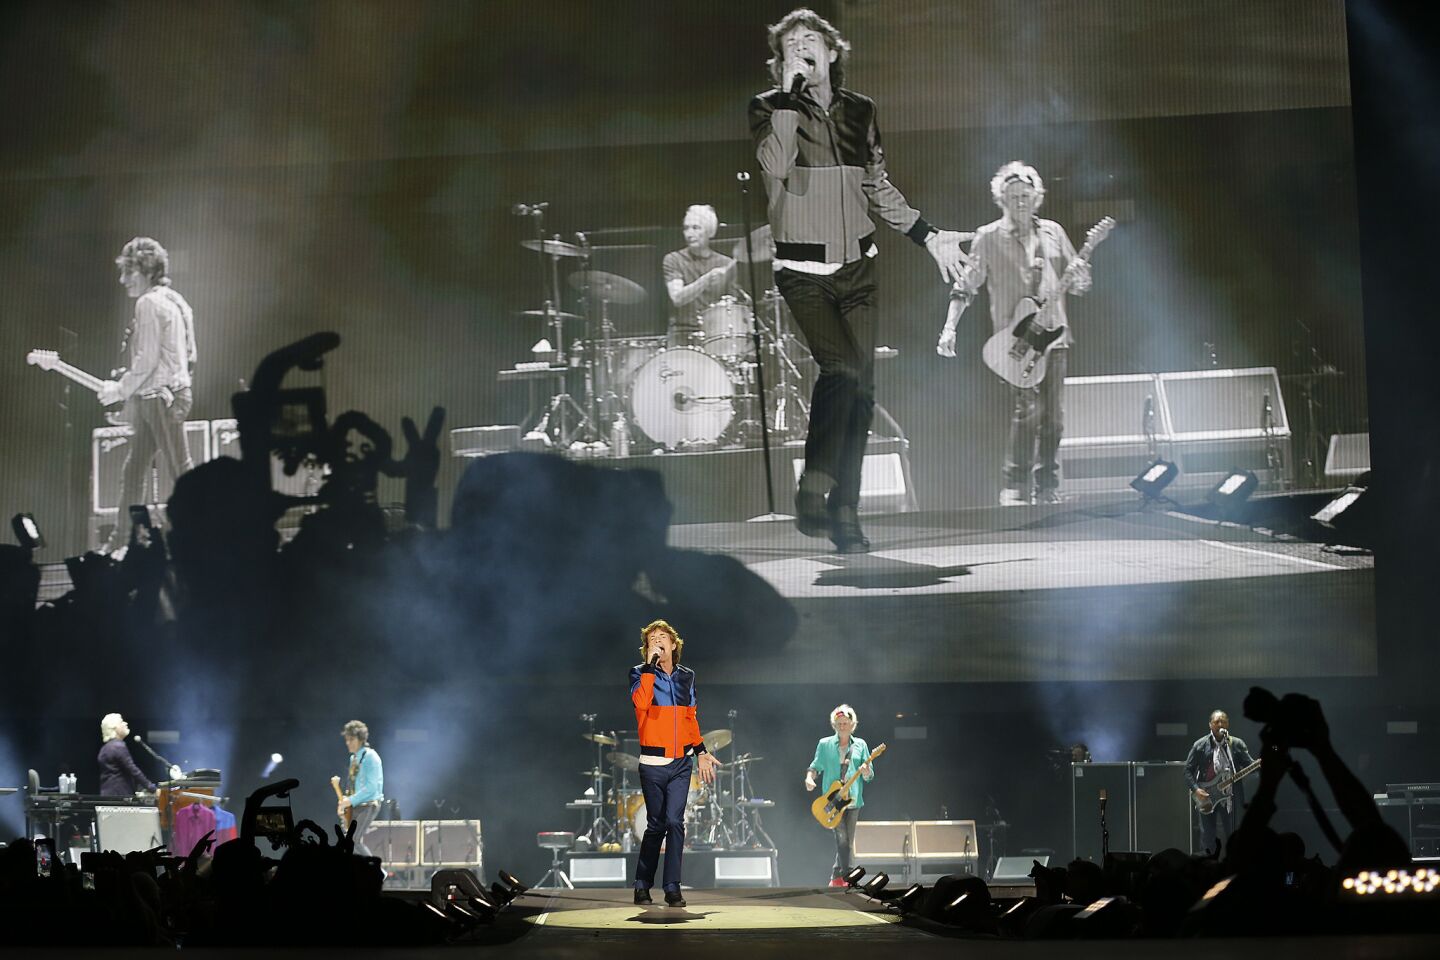 Mick Jagger and The Rolling Stones perform on the first day of the three-day Desert Trip.